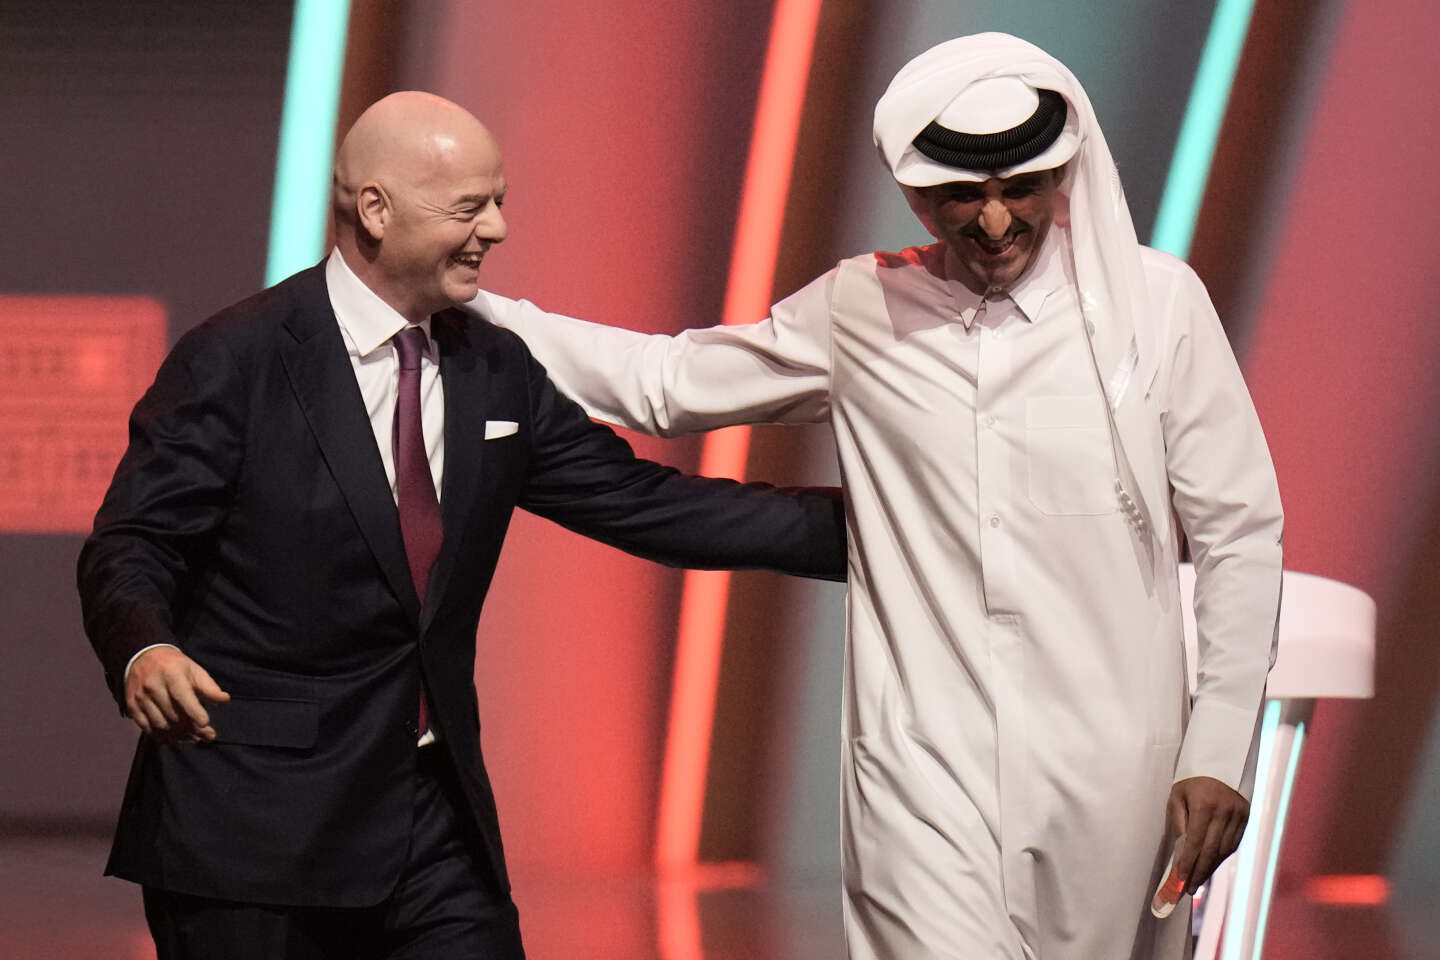 Qatar suspected of spying on Gianni Infantino and ex-Swiss attorney general Michael Lauber